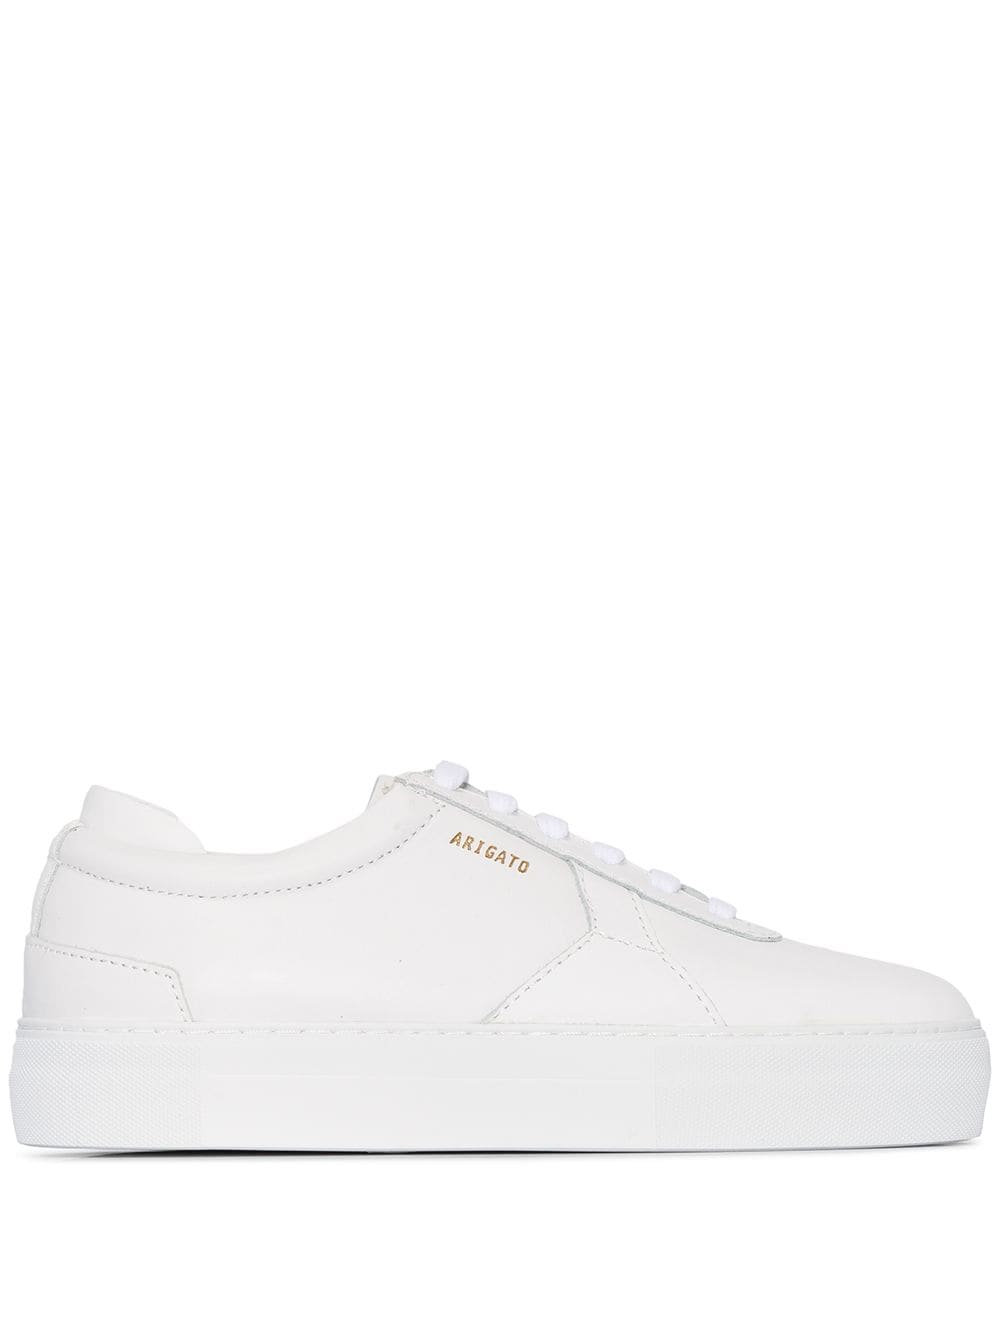 on trend white trainers